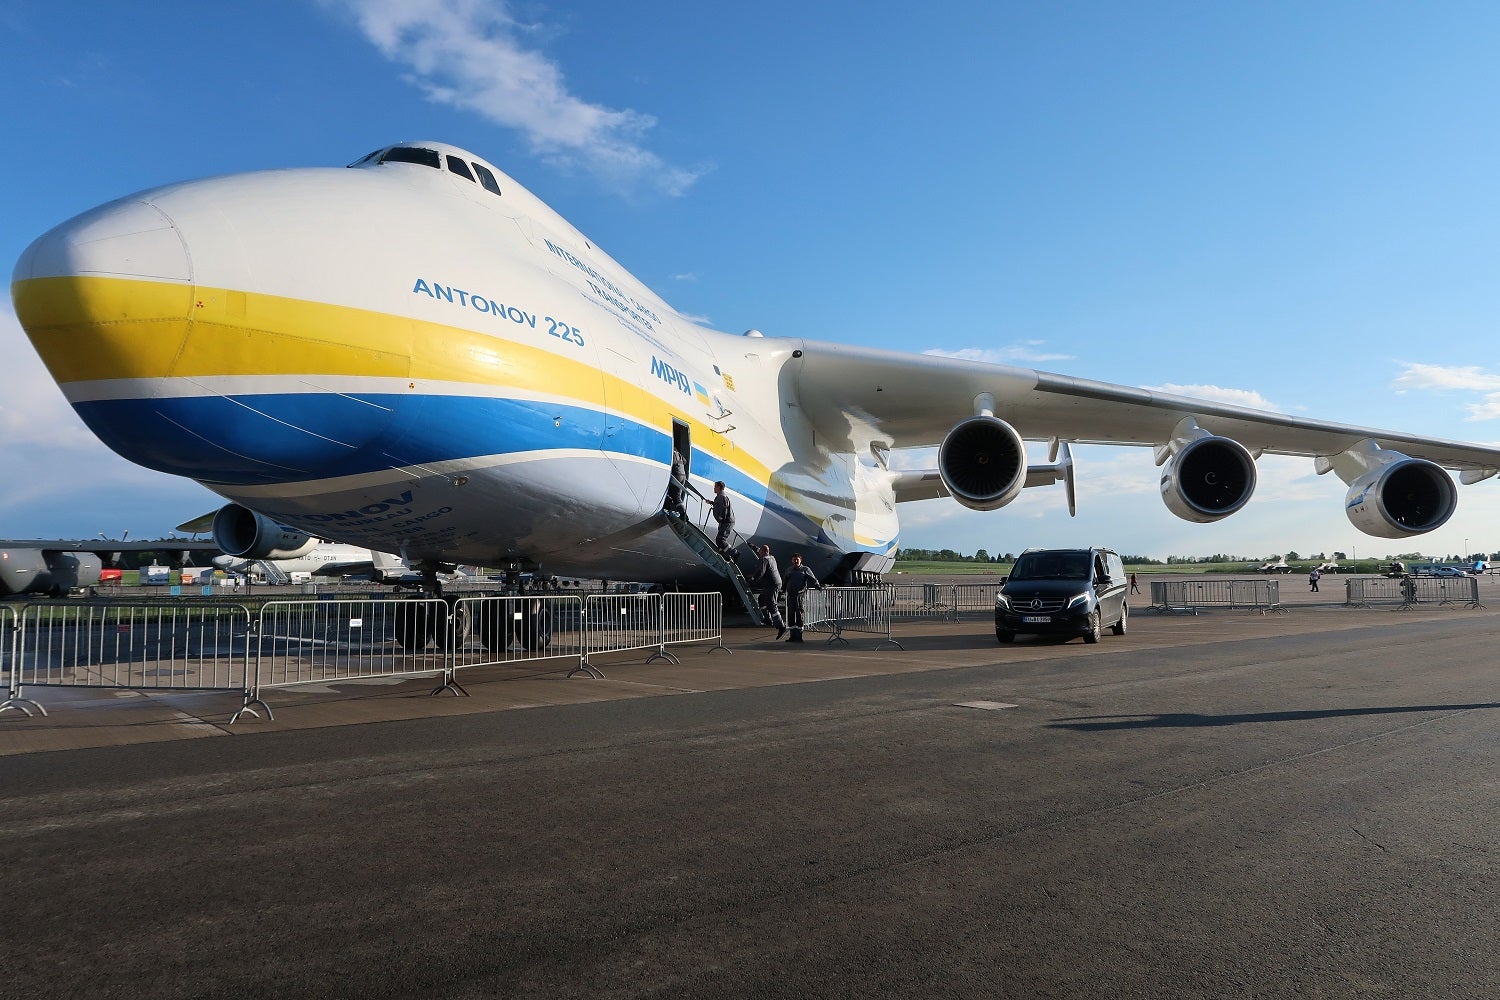 21 marked 30 years since the Antonov AN-225 first took to the air. 